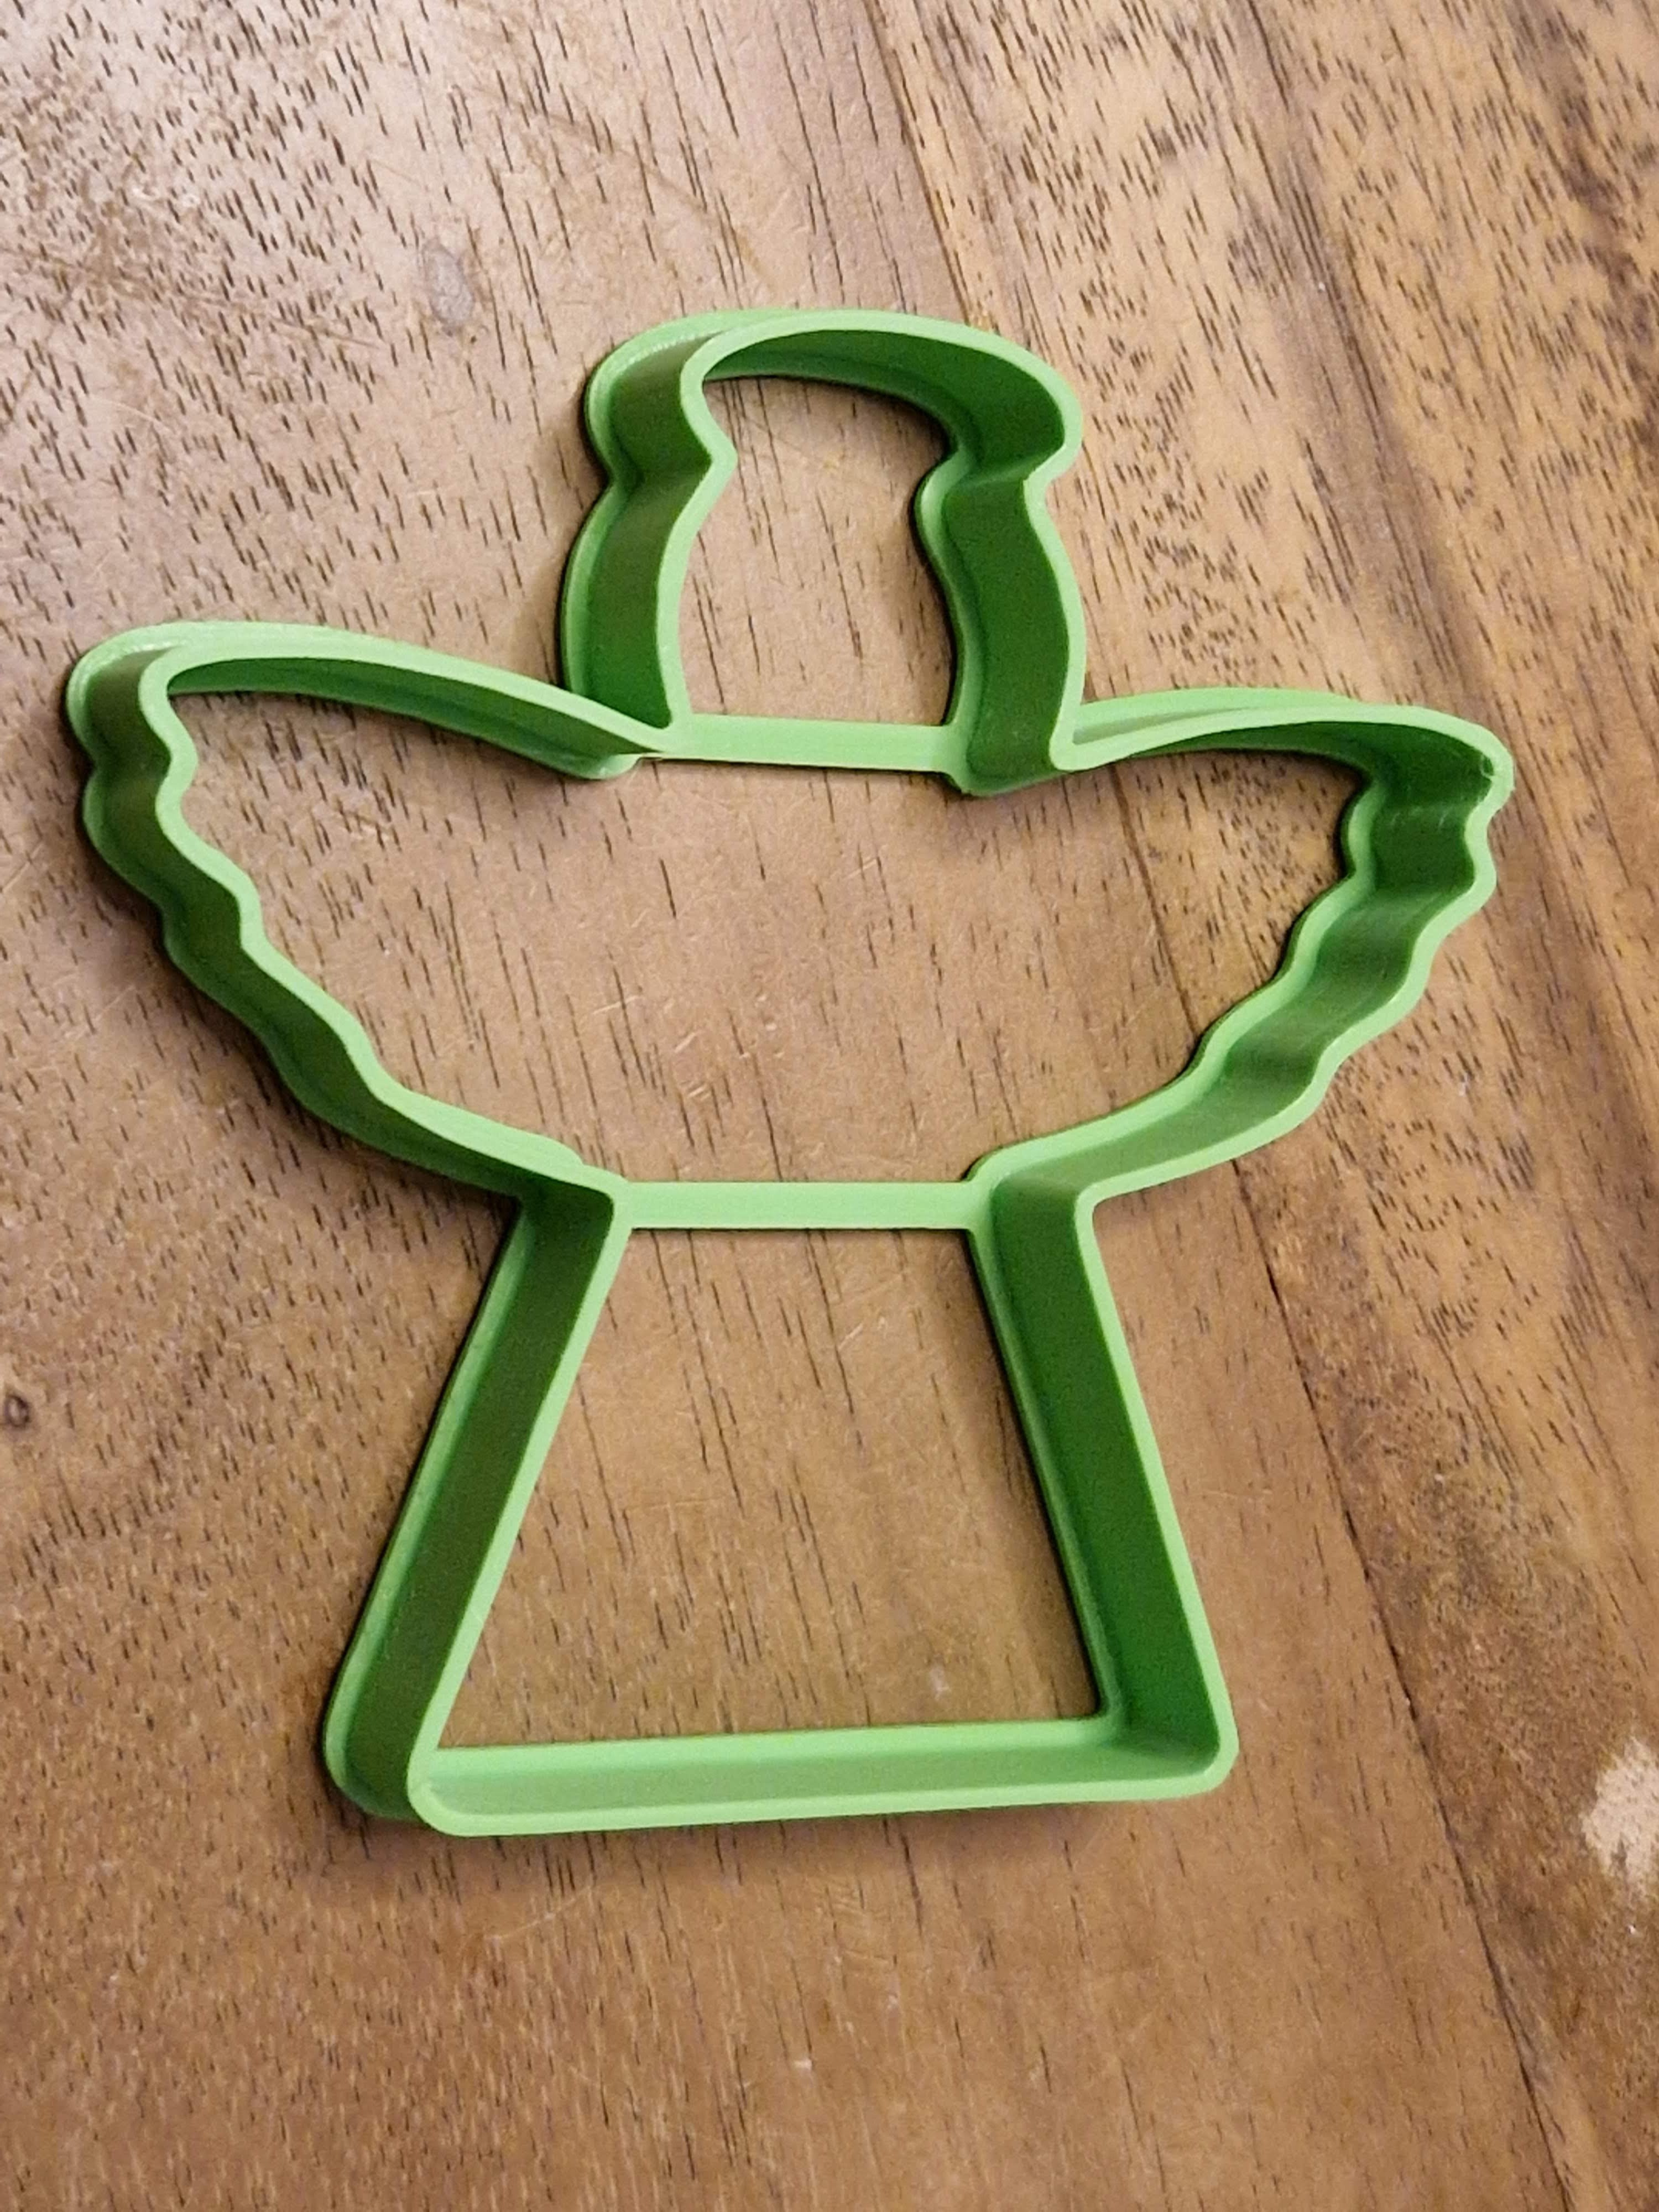 Cookie cutter in the shape of an angel